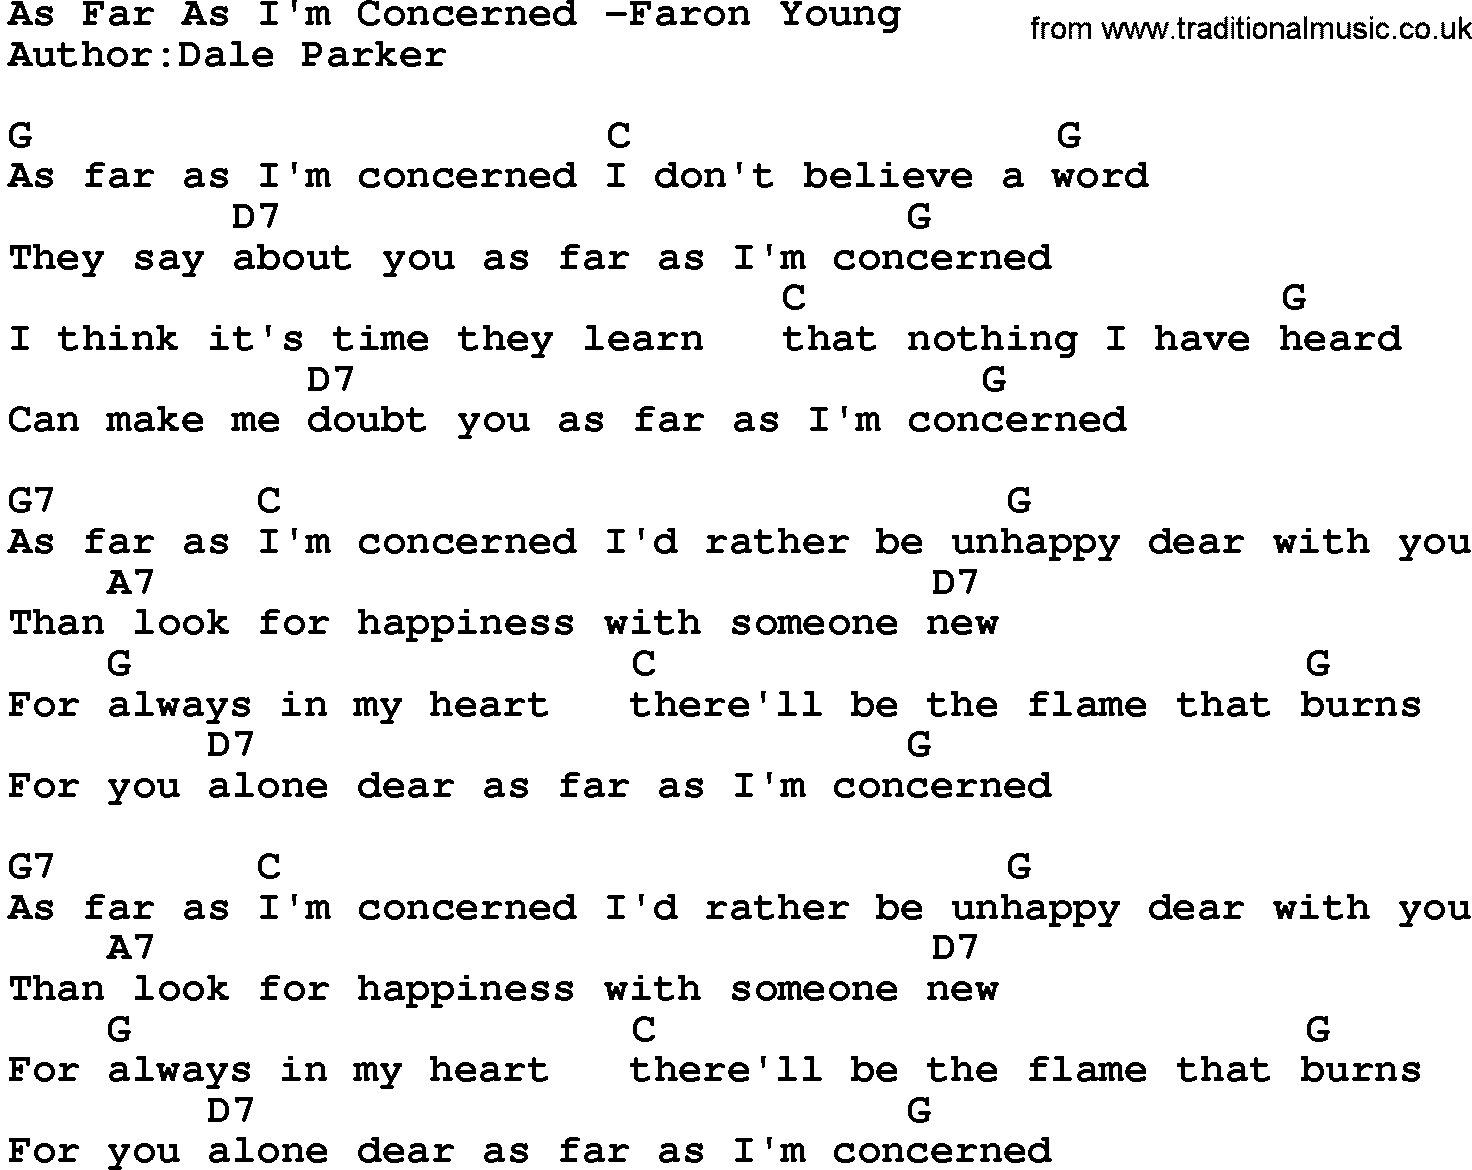 Country music song: As Far As I'm Concerned -Faron Young lyrics and chords